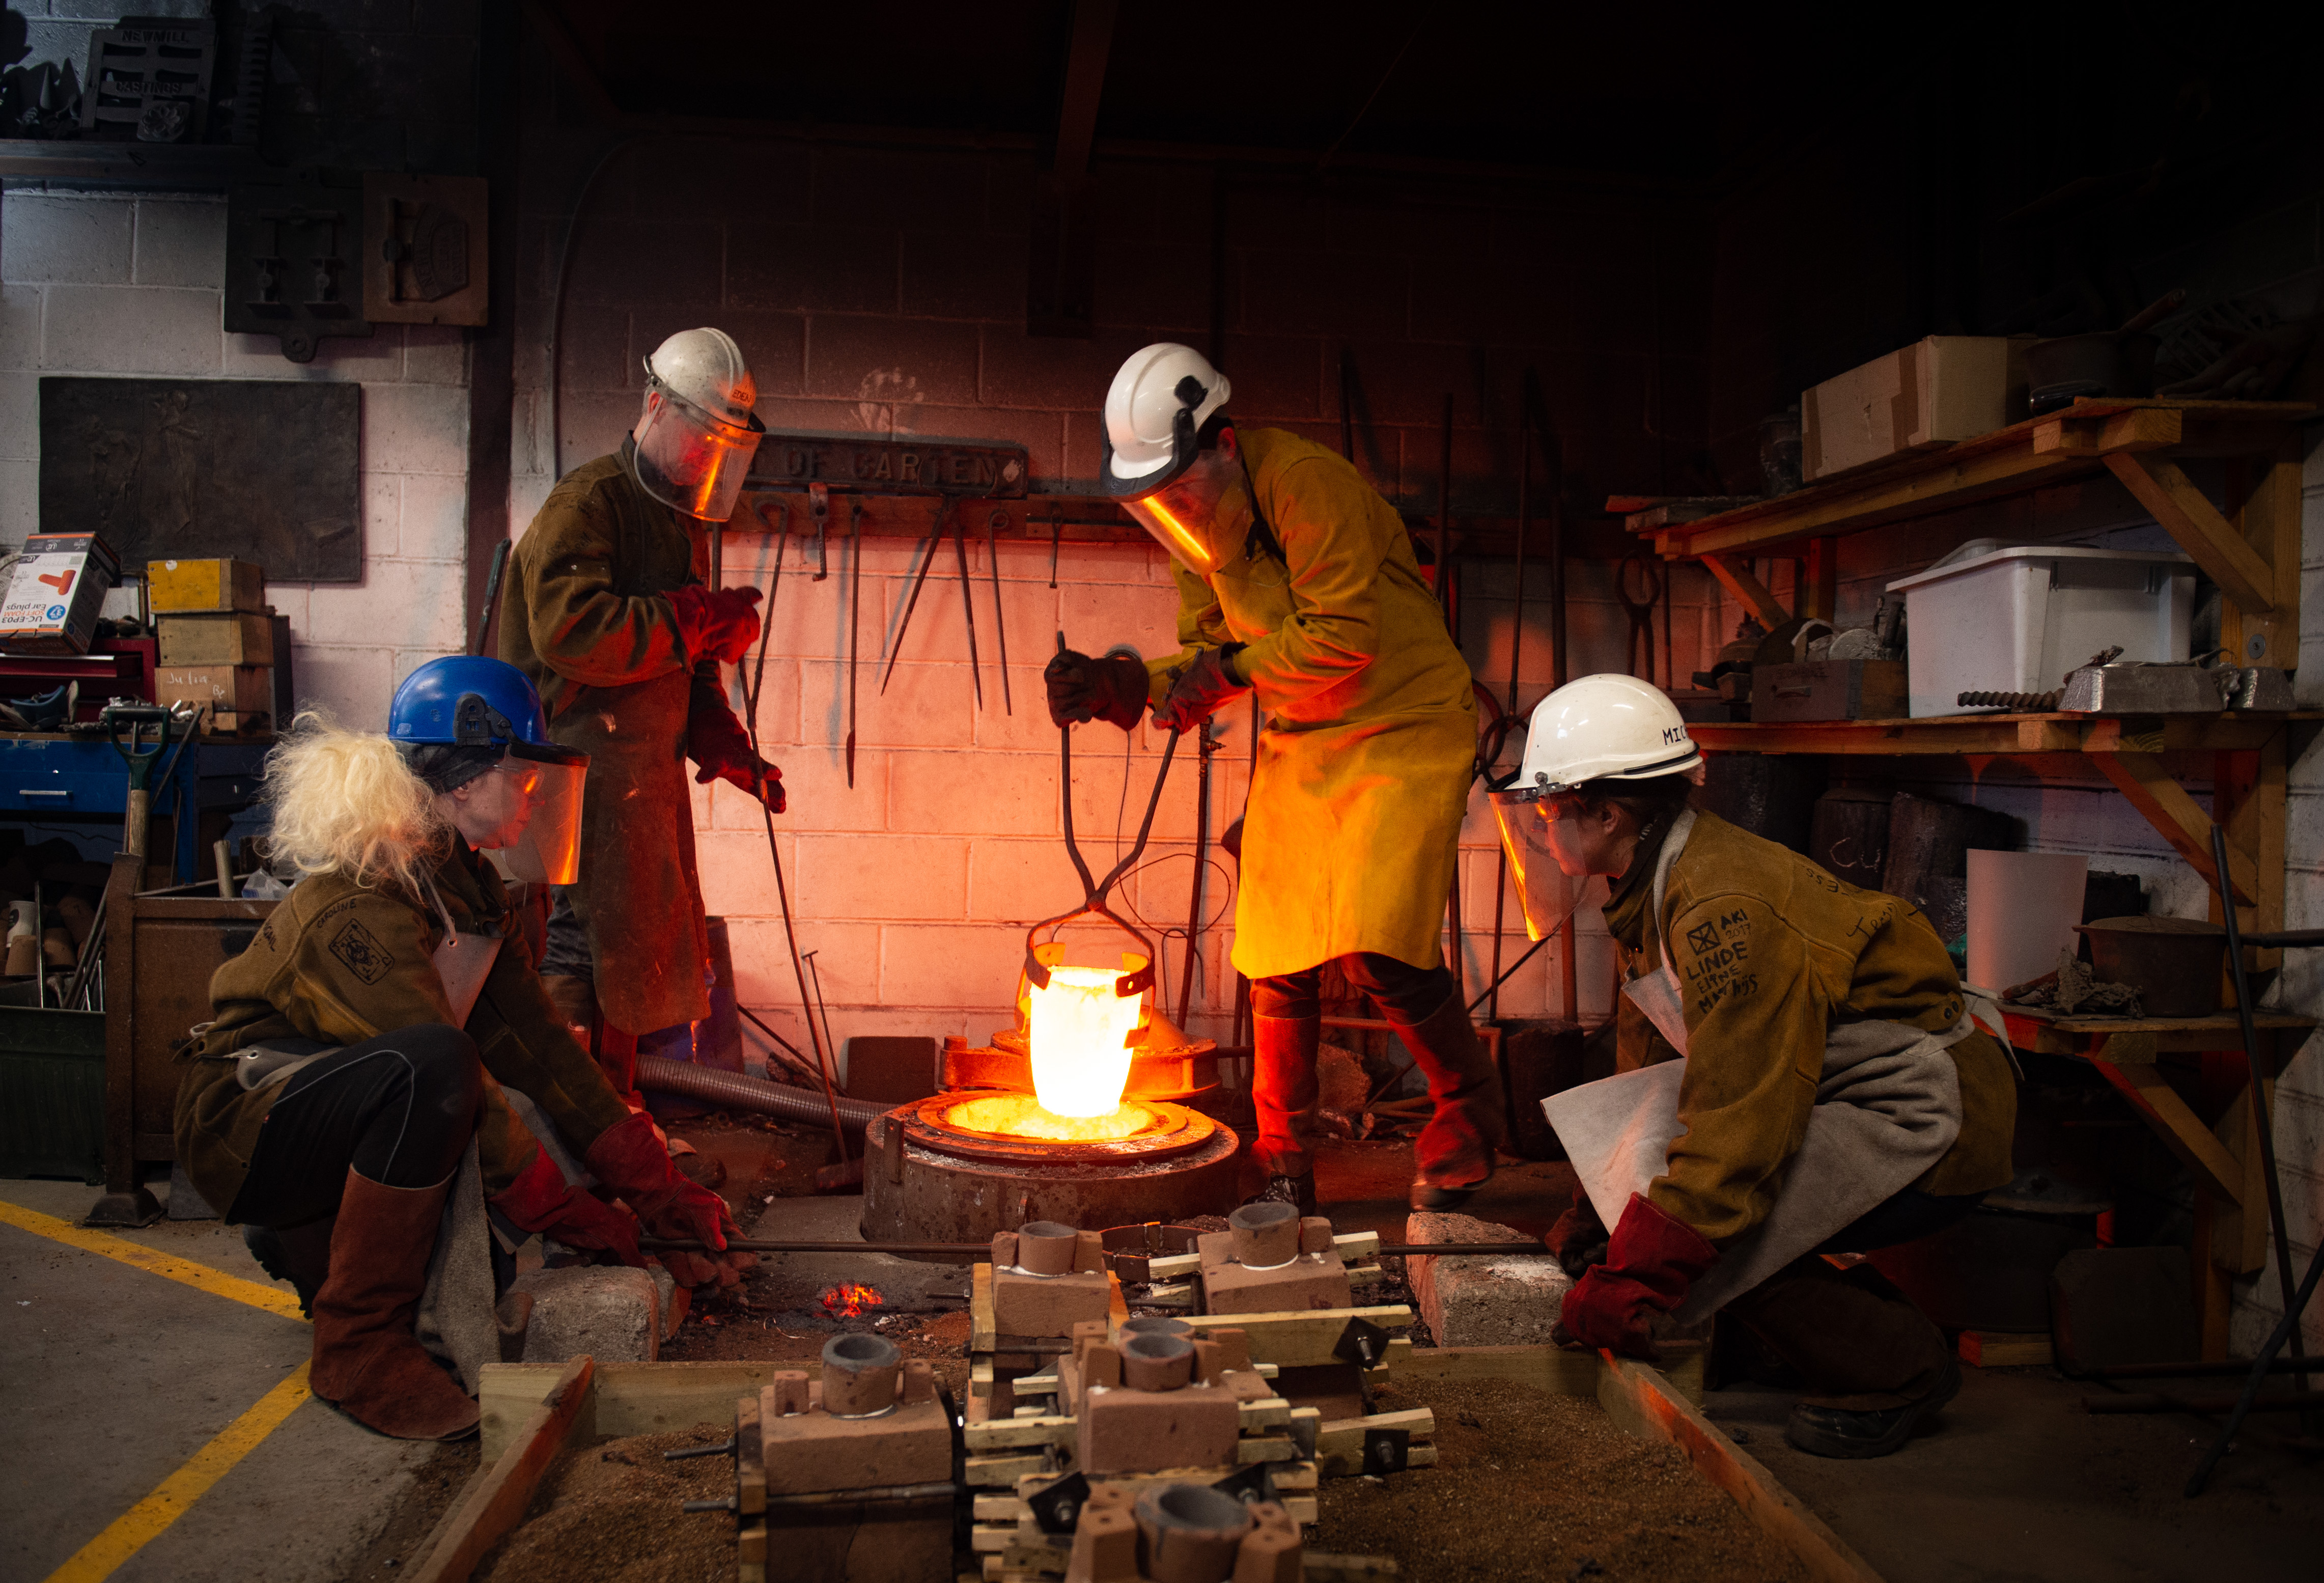 Pictures by JASON HEDGES
With the approach of Scottish Sculpture Workshop's 40th anniversary in Lumsden, artists fill moulds with molten bronze